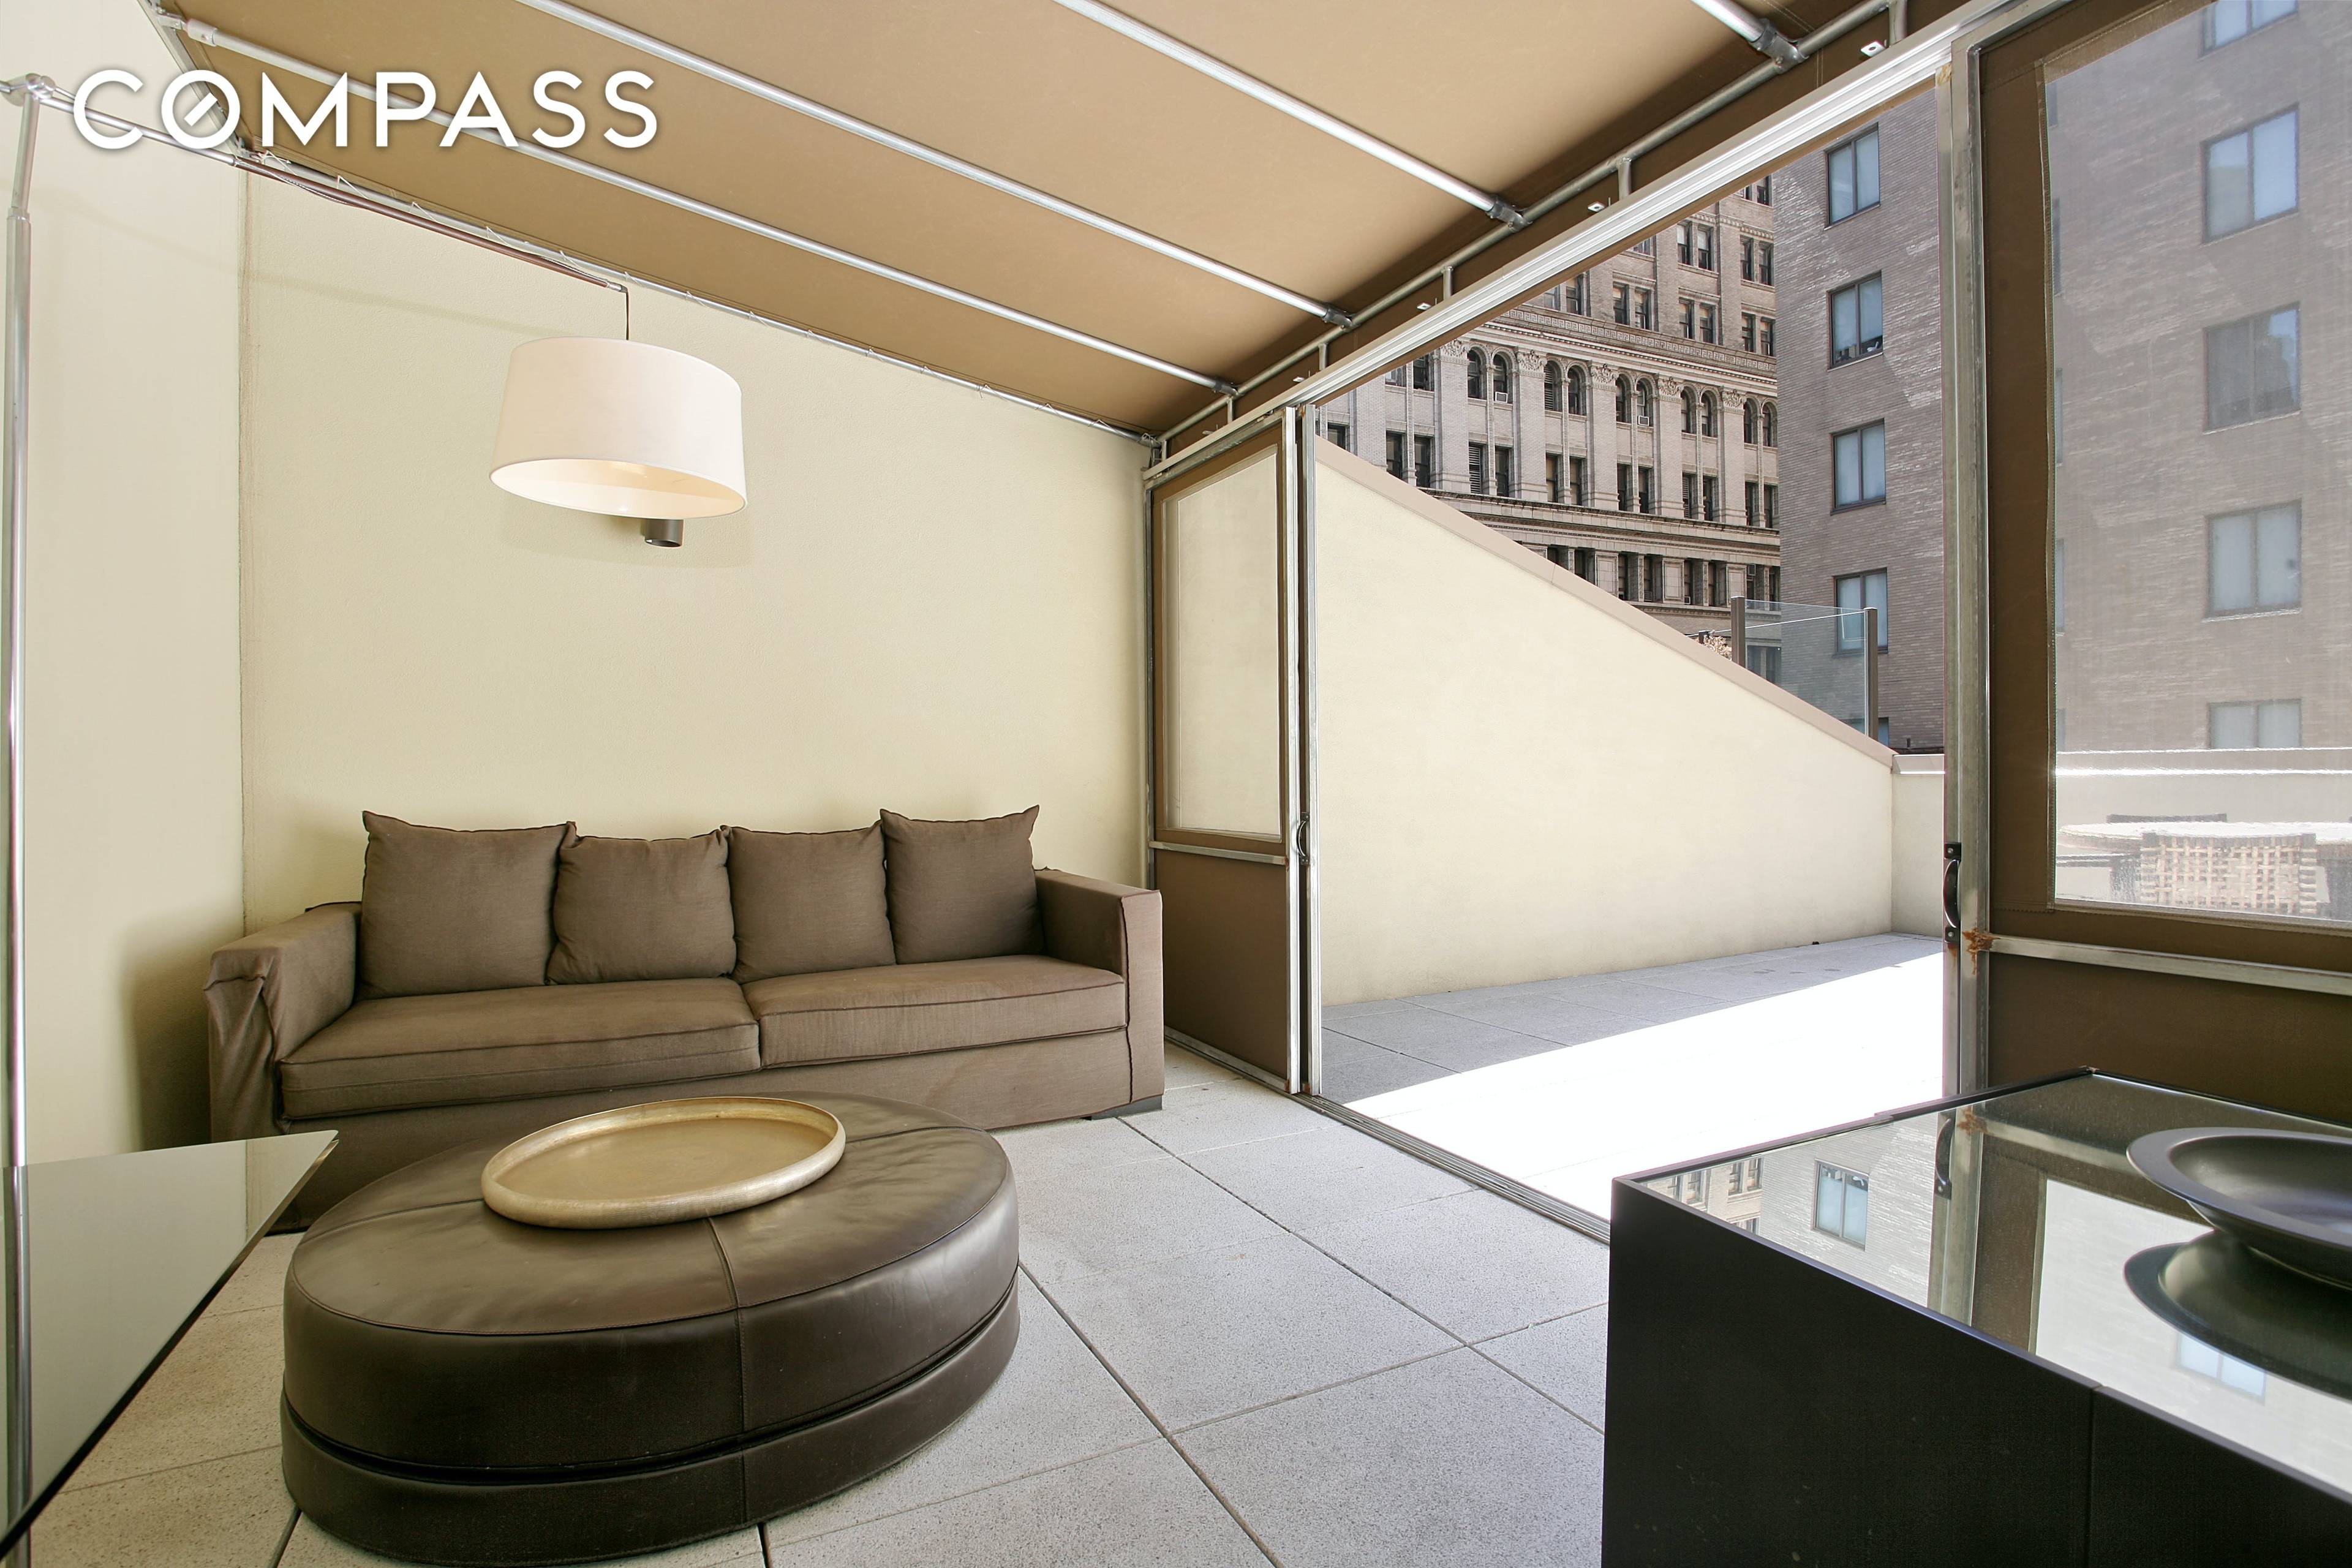 Unrivaled outdoor space and distinctive design in Wall Street's preeminent luxury condominium The Cipriani Club Residences at 55 Wall Street.